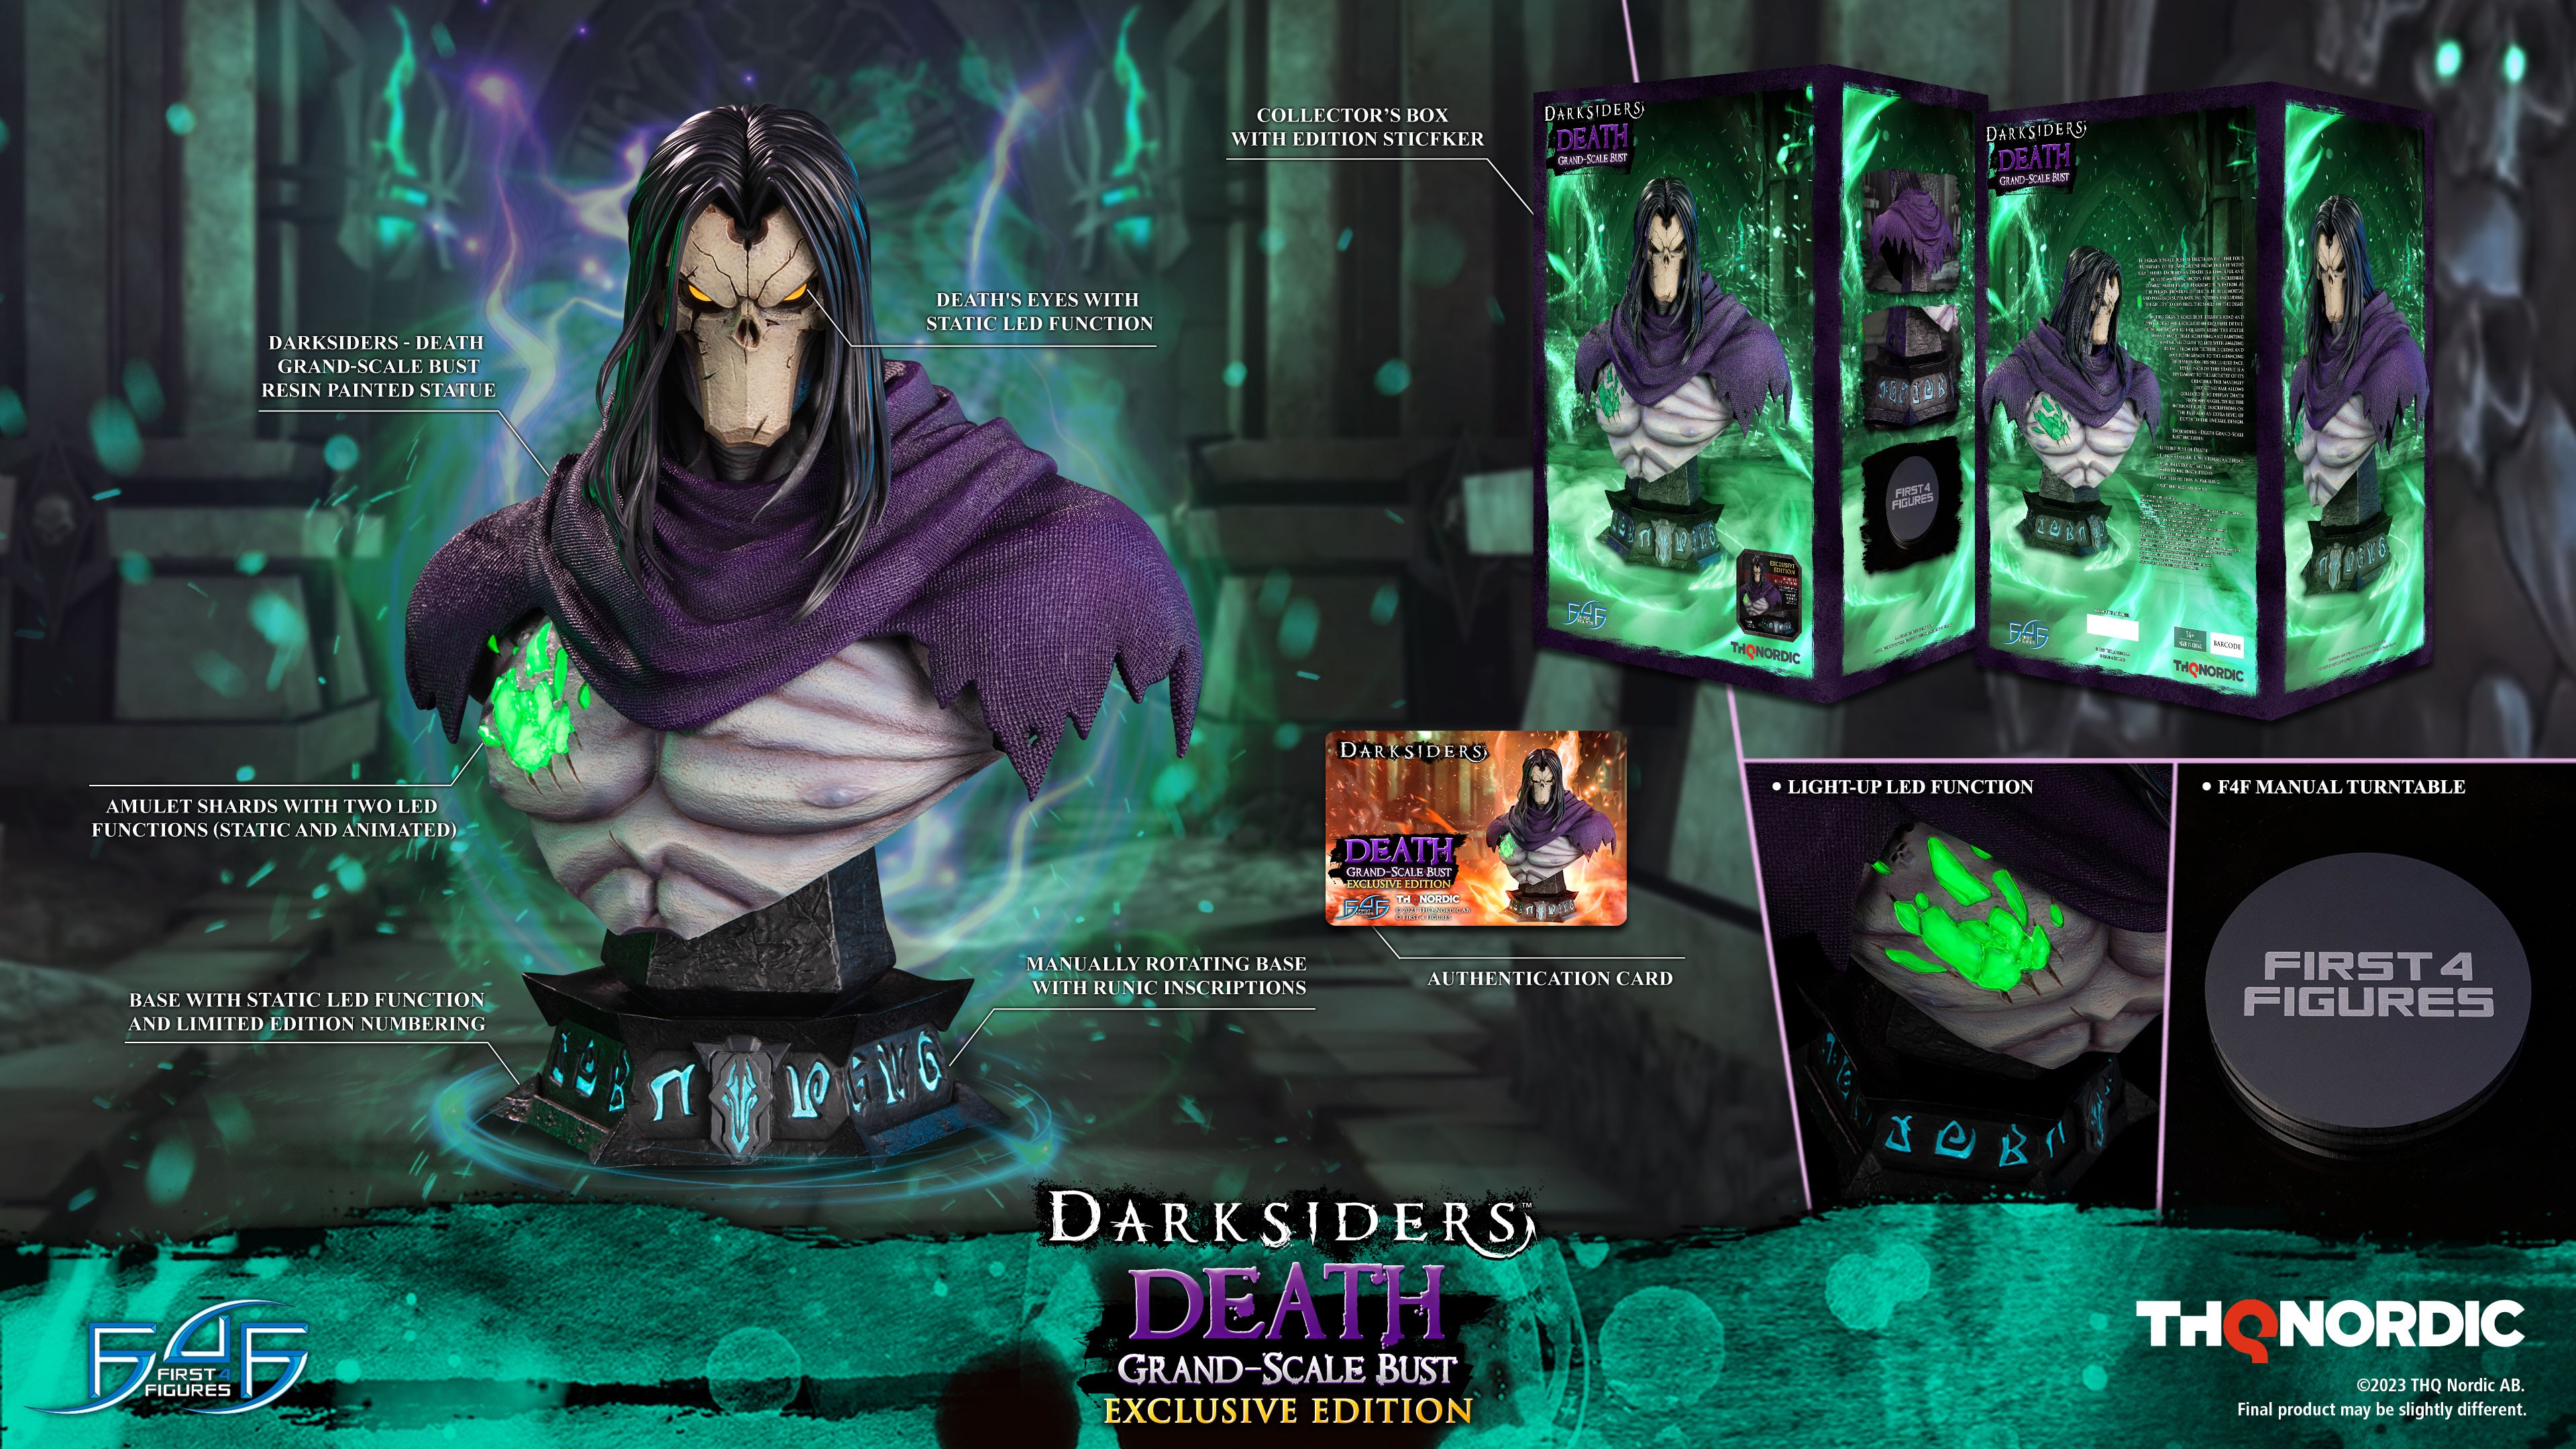 Darksiders - Death Grand Scale Bust (Exclusive Edition)